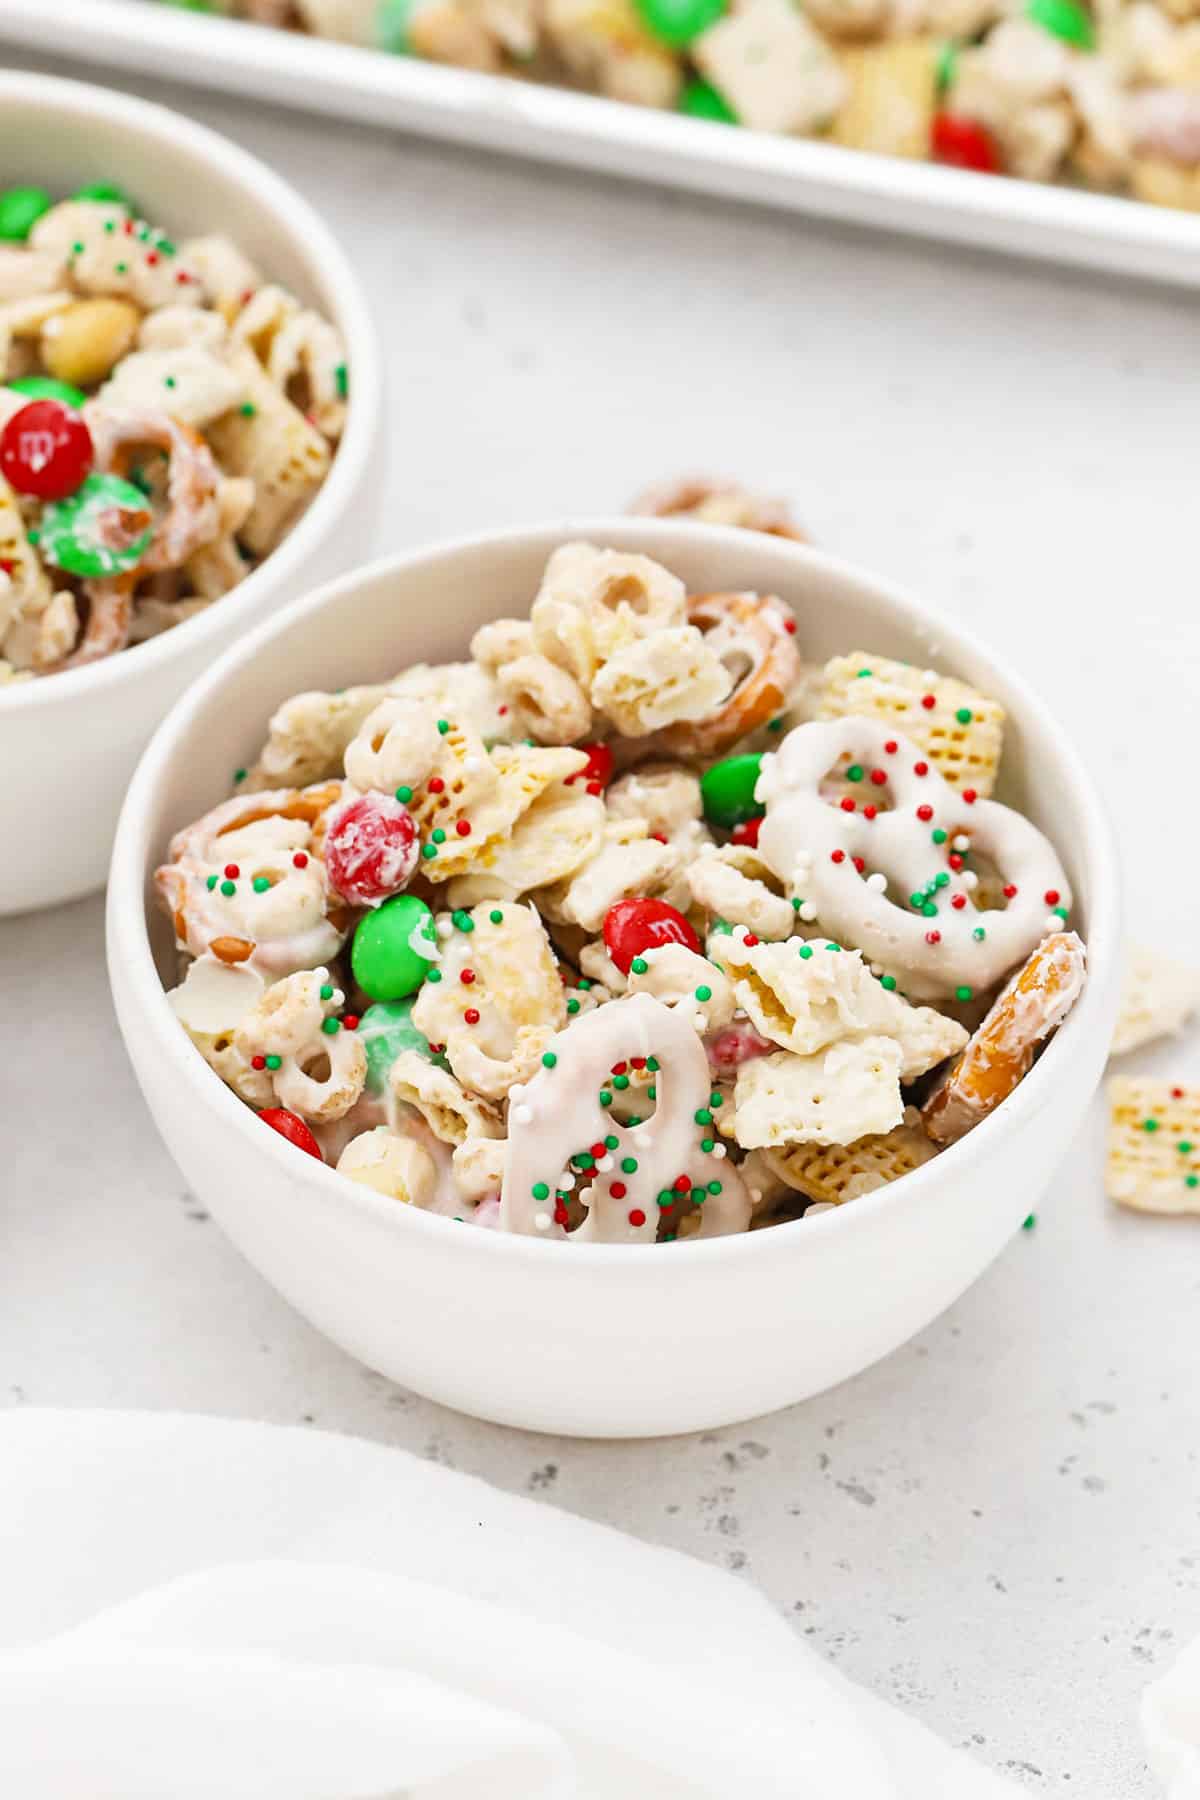 Large white bowl of gluten-free holiday chex mix with m&ms and pretzels